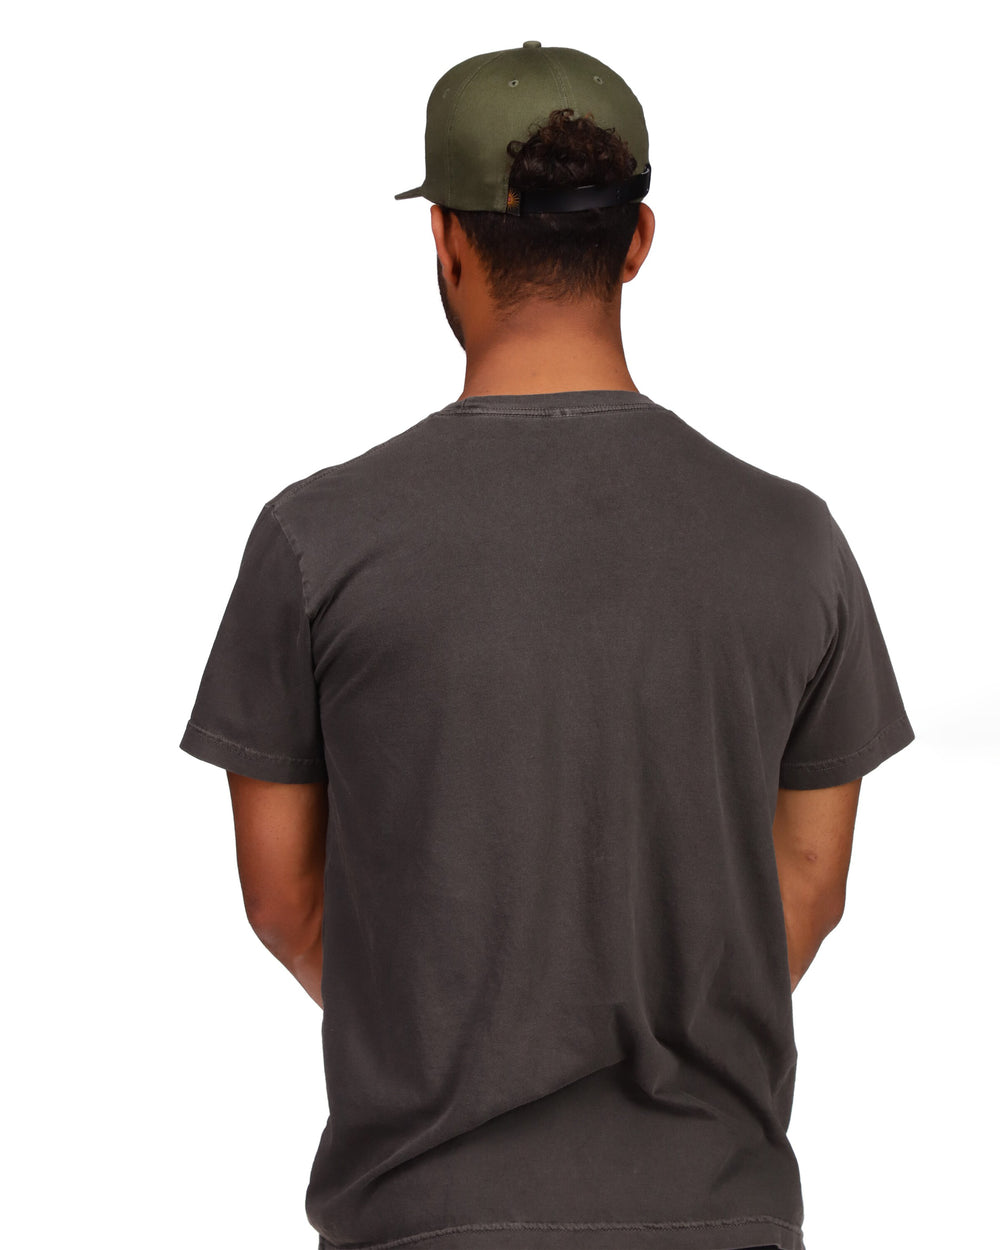 Solis Hat - Army Green